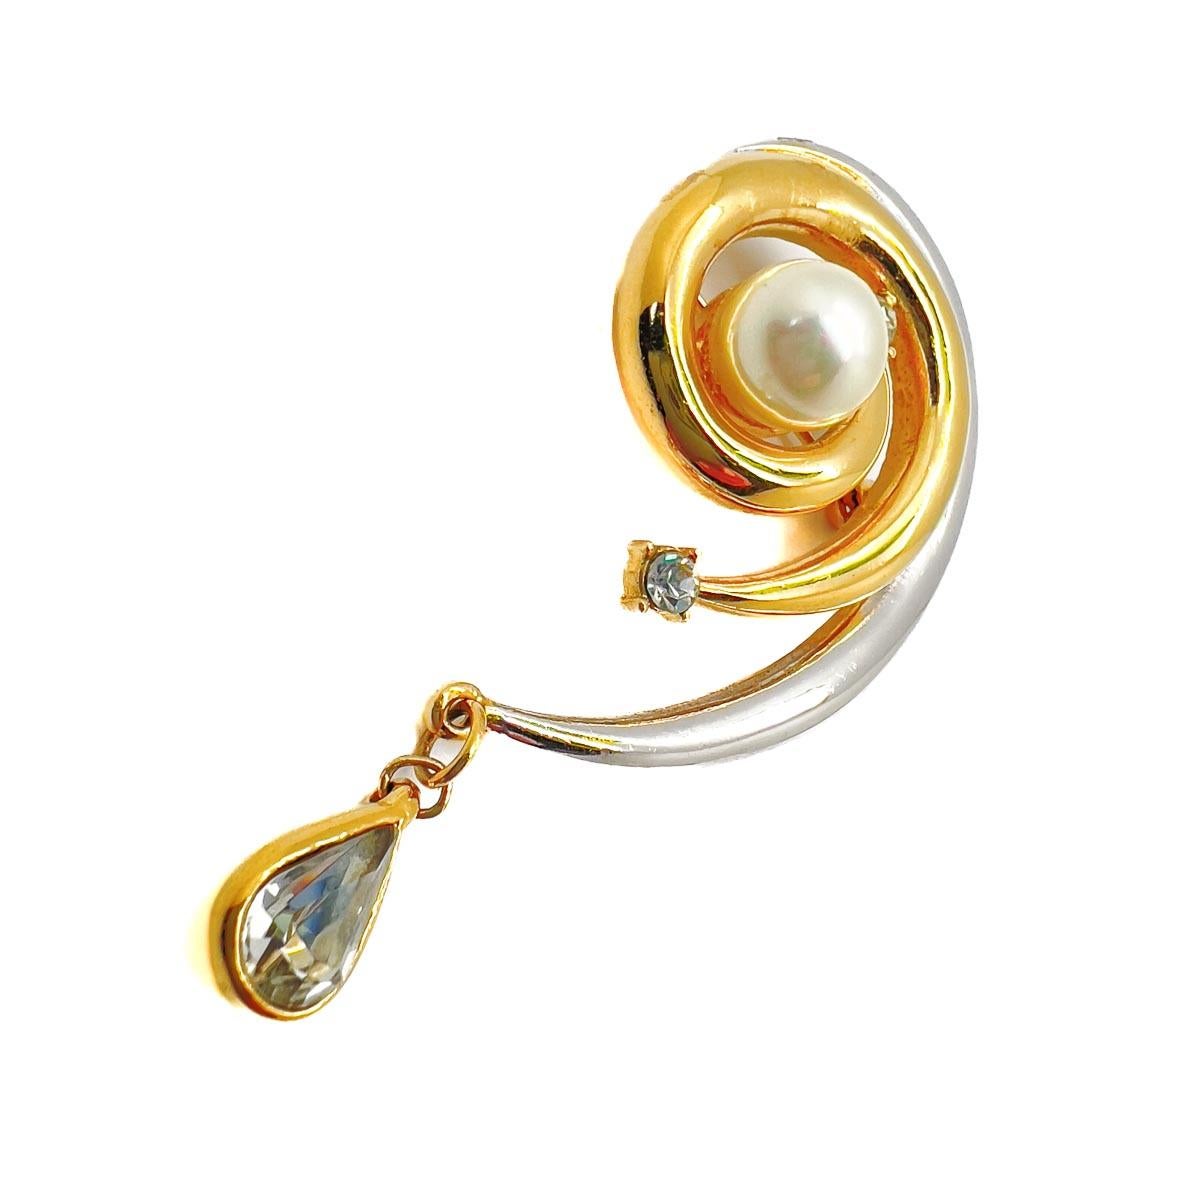 A Vintage Balmain Swirl Brooch. A stunning lapel adornment from the great Parisian house. Featuring mixed metals for an eye catching look and finished to perfection with crystal and pearl. A timeless find that will always have the Parisian style